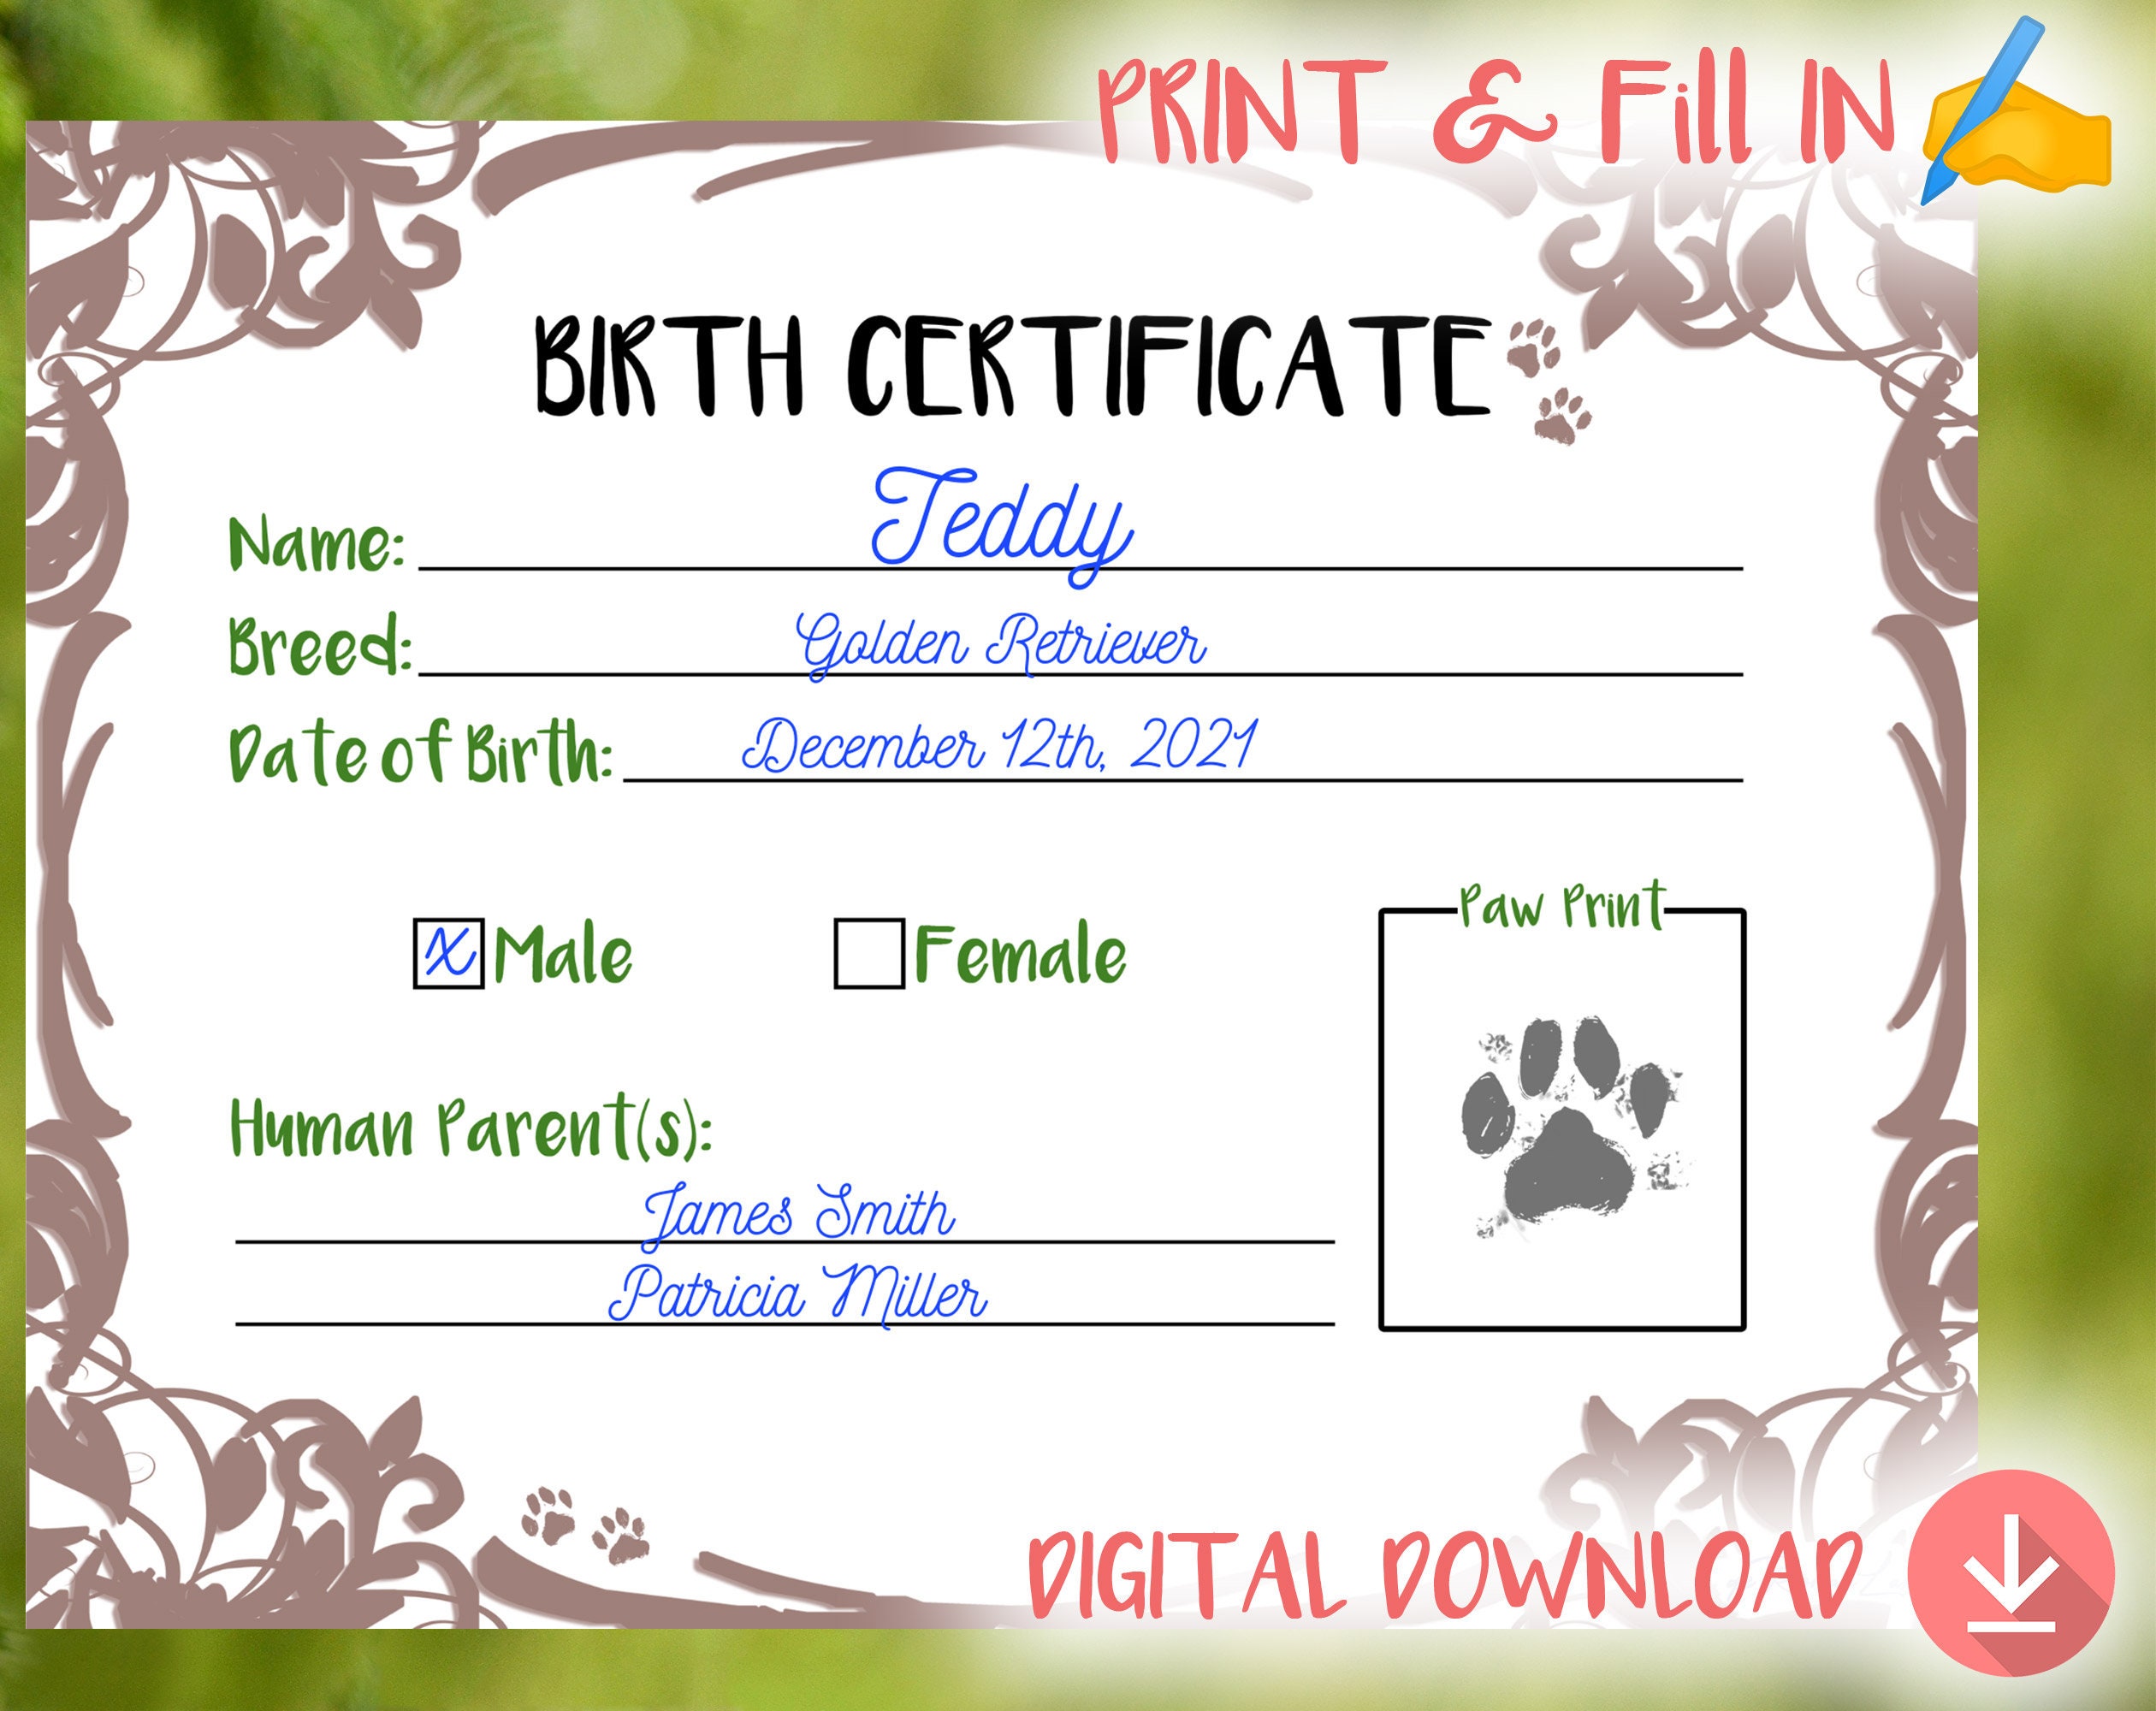 puppy-birth-certificate-printable-print-and-fill-in-new-etsy